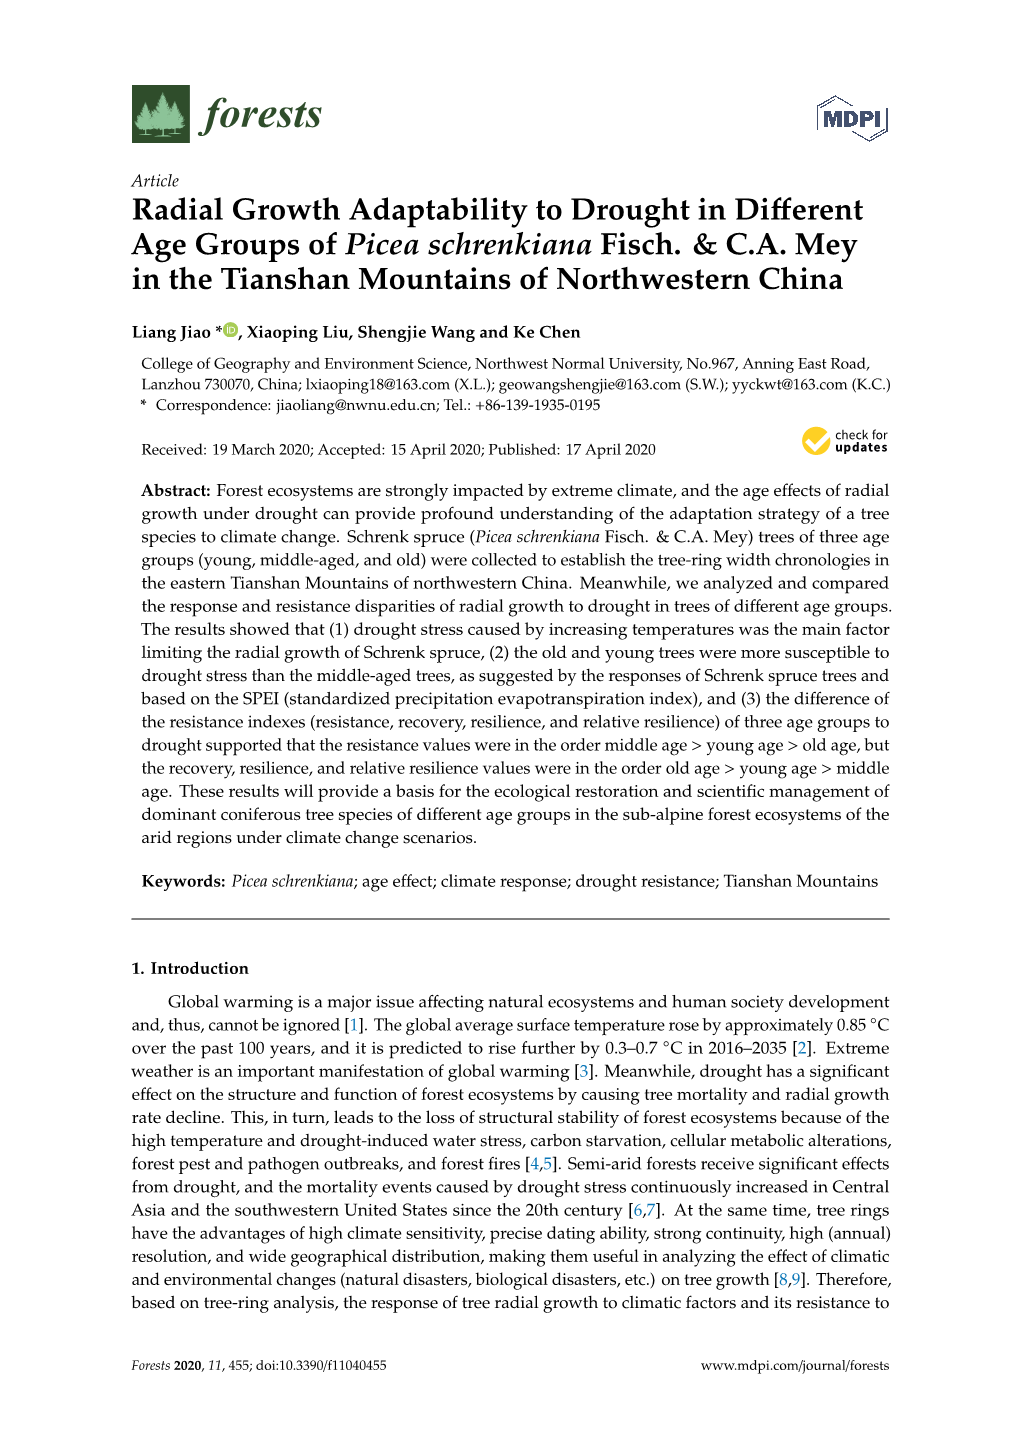 Radial Growth Adaptability to Drought in Different Age Groups of Picea